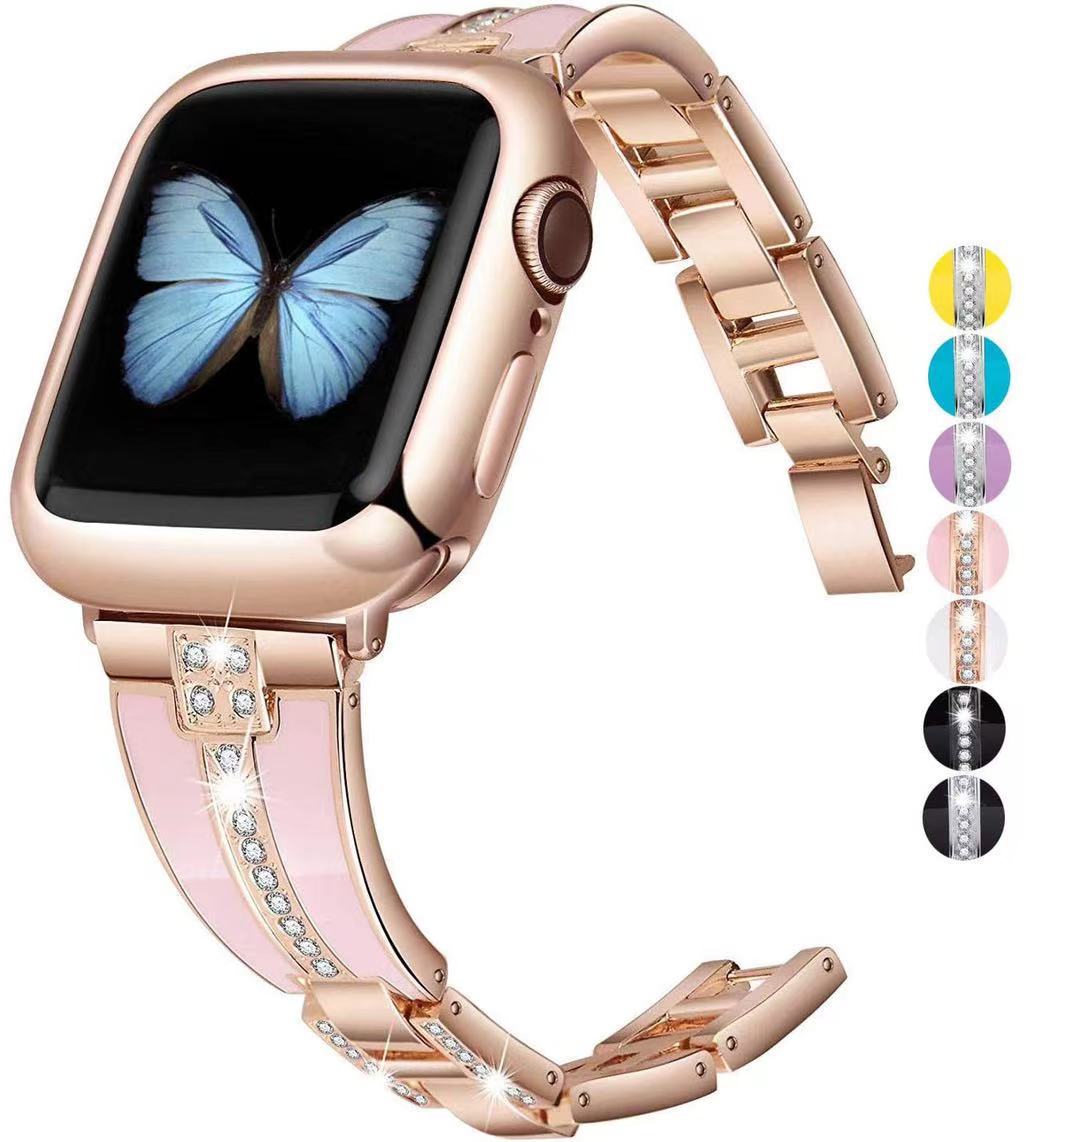 Resin with Metal strap for Apple watch